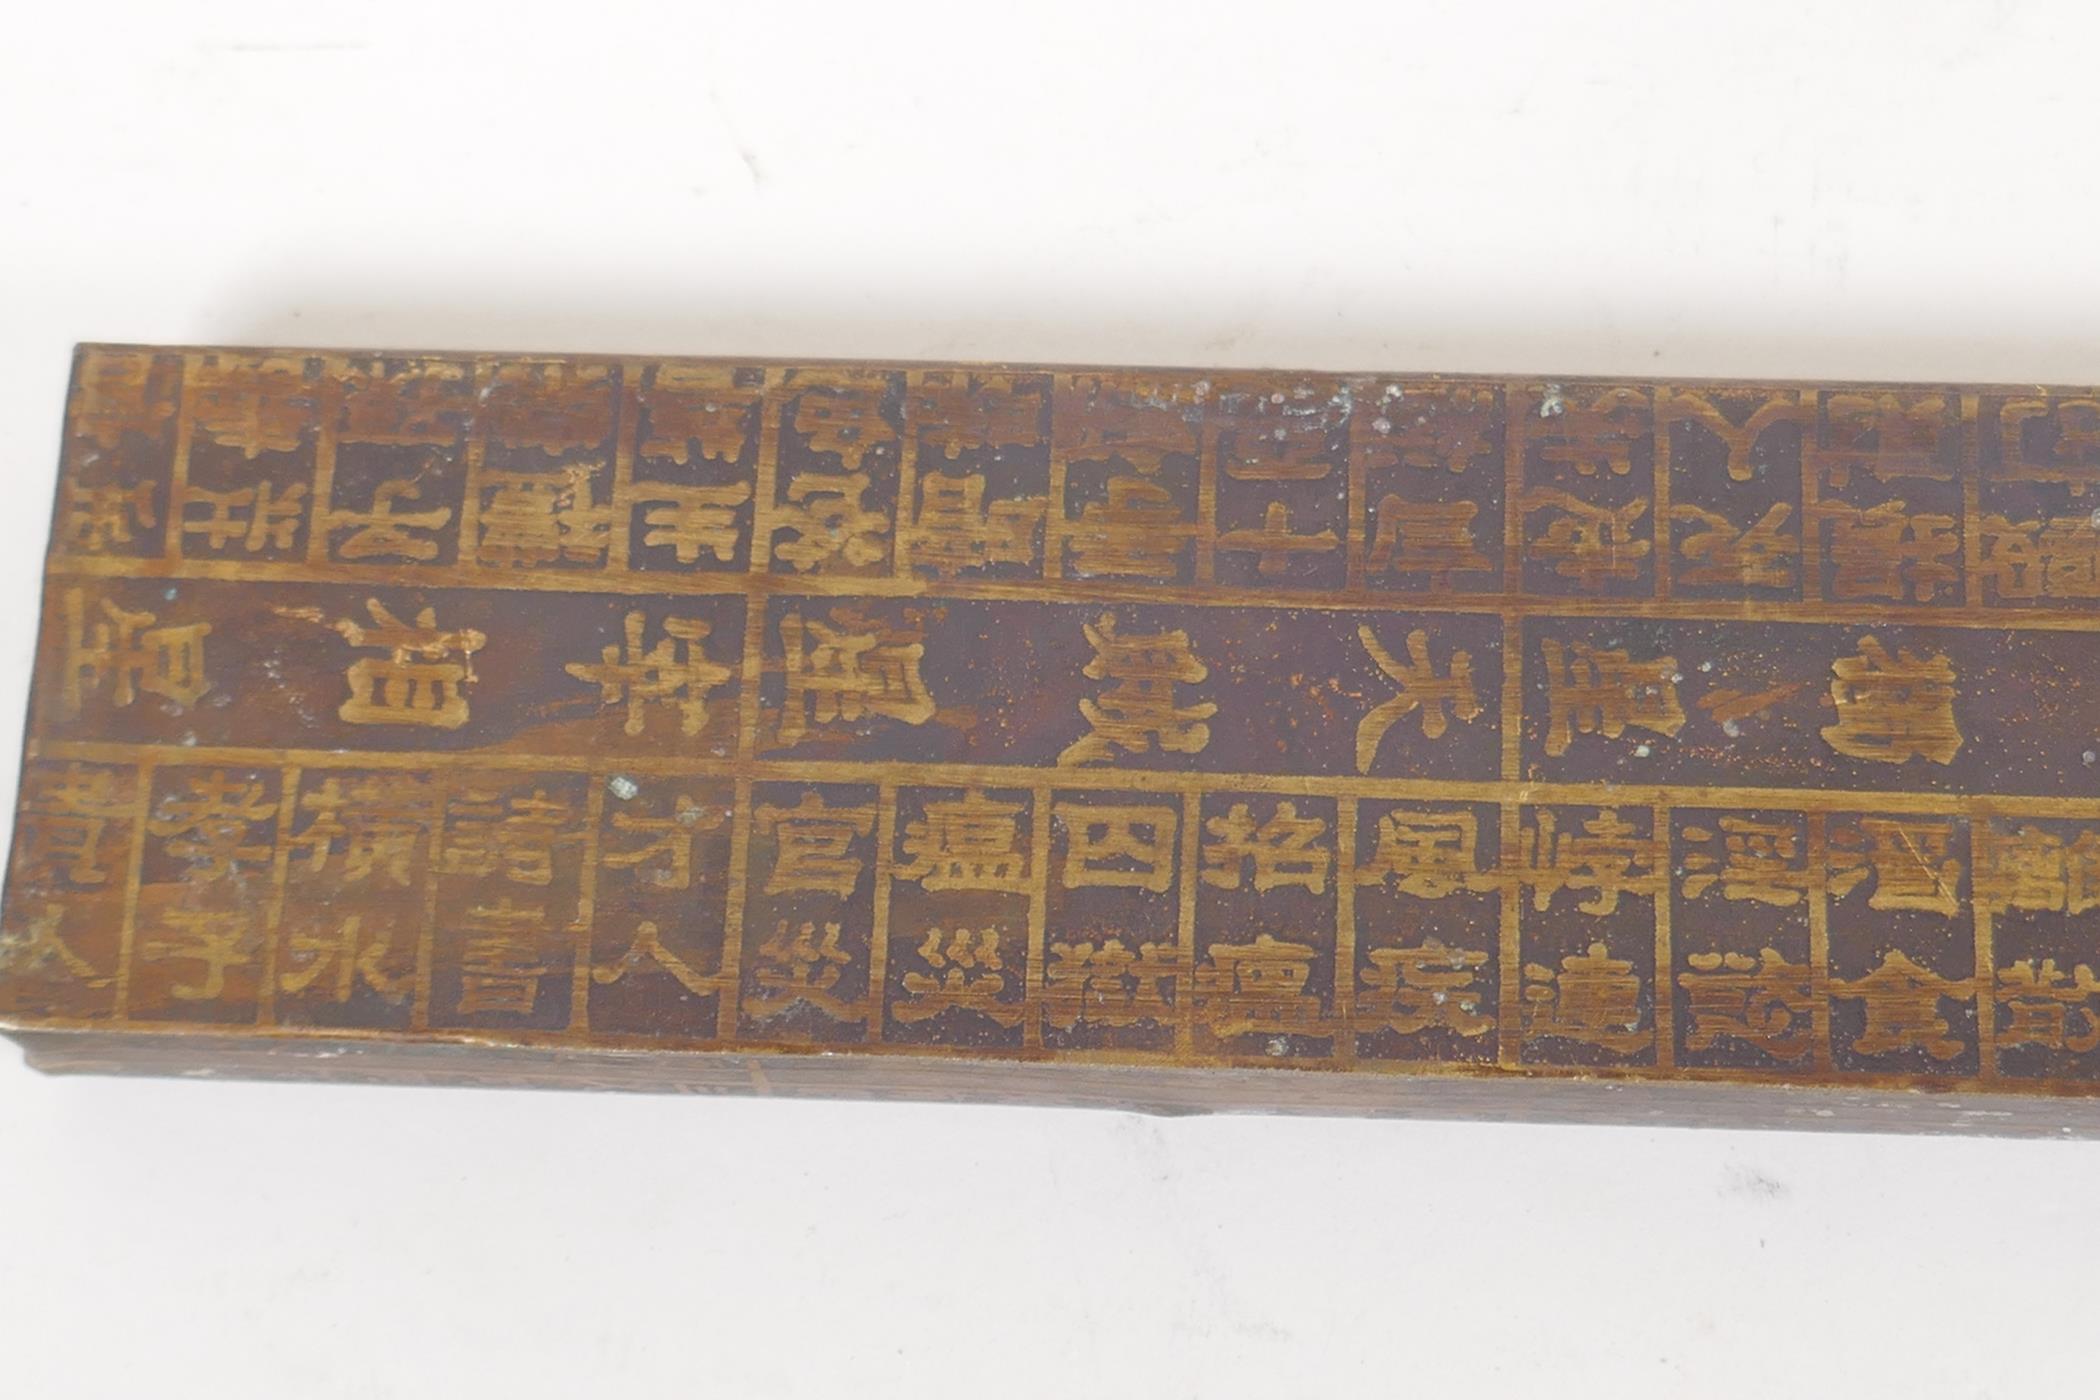 A Chinese metal wrapped scroll weight / measure decorated with calligraphy, 18" long - Image 5 of 5